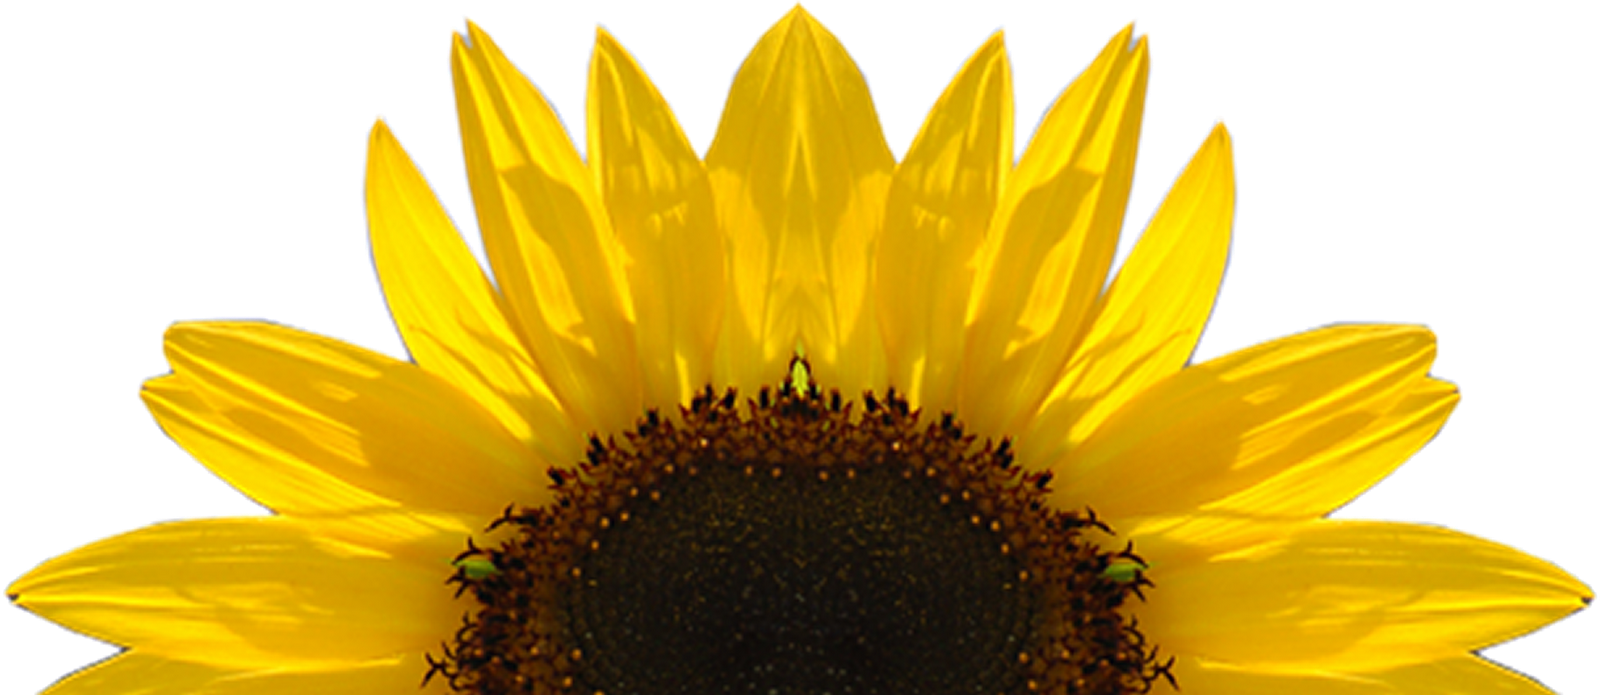 Sunflowers PNG Transparent Sunflowers.PNG Images. | PlusPNG